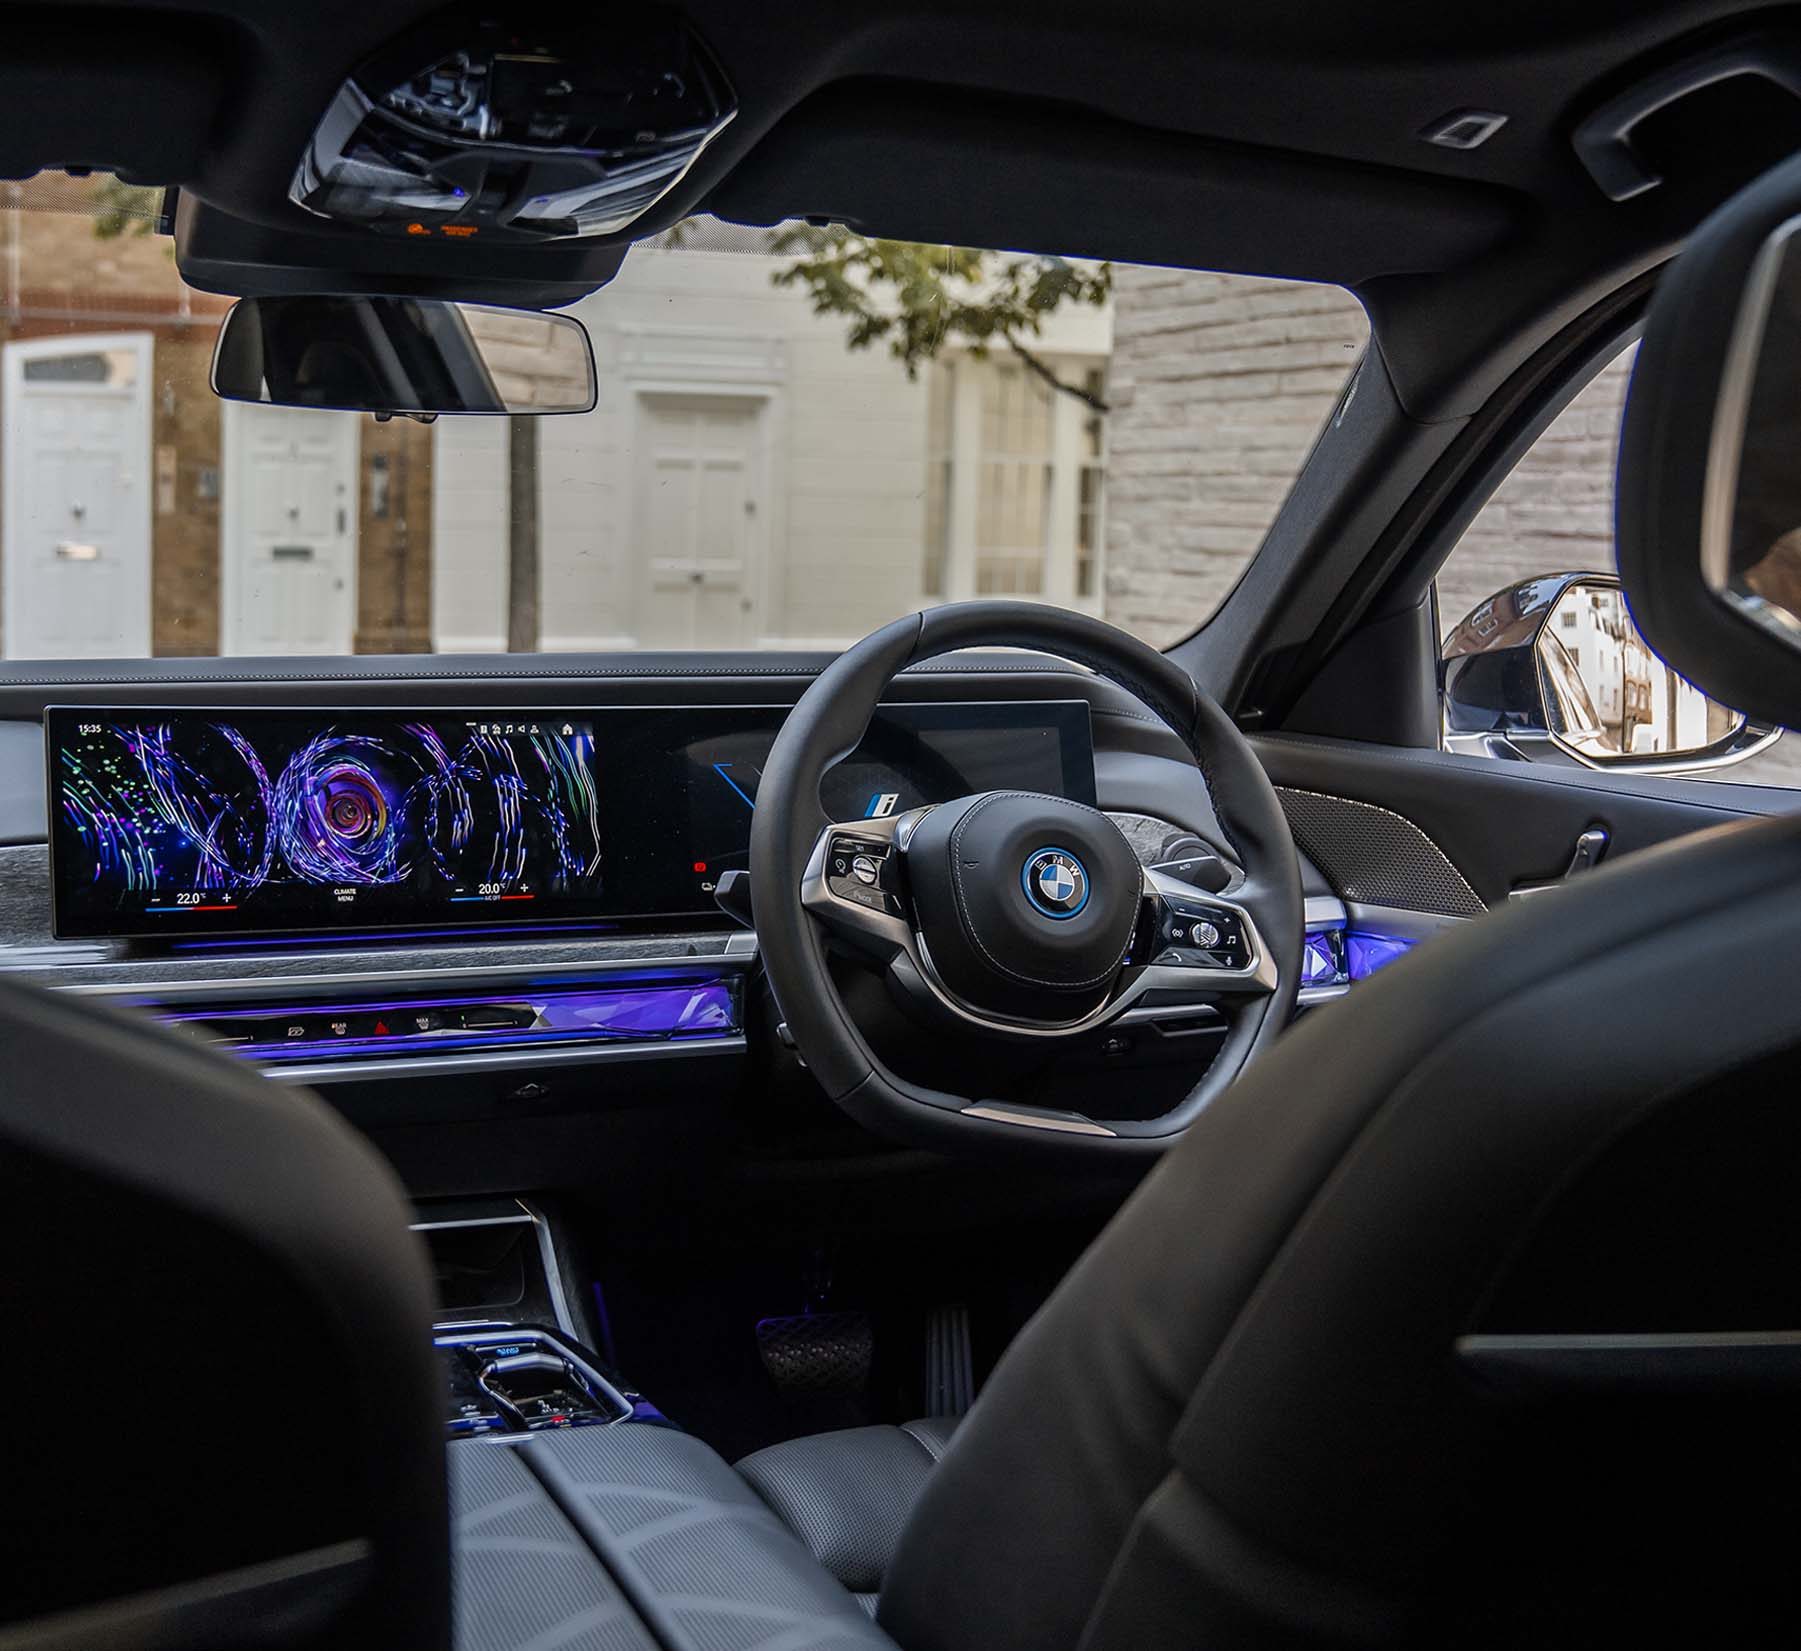 Driver Cabin of the BMW i7 Chauffeur Car from AZ Luxe London